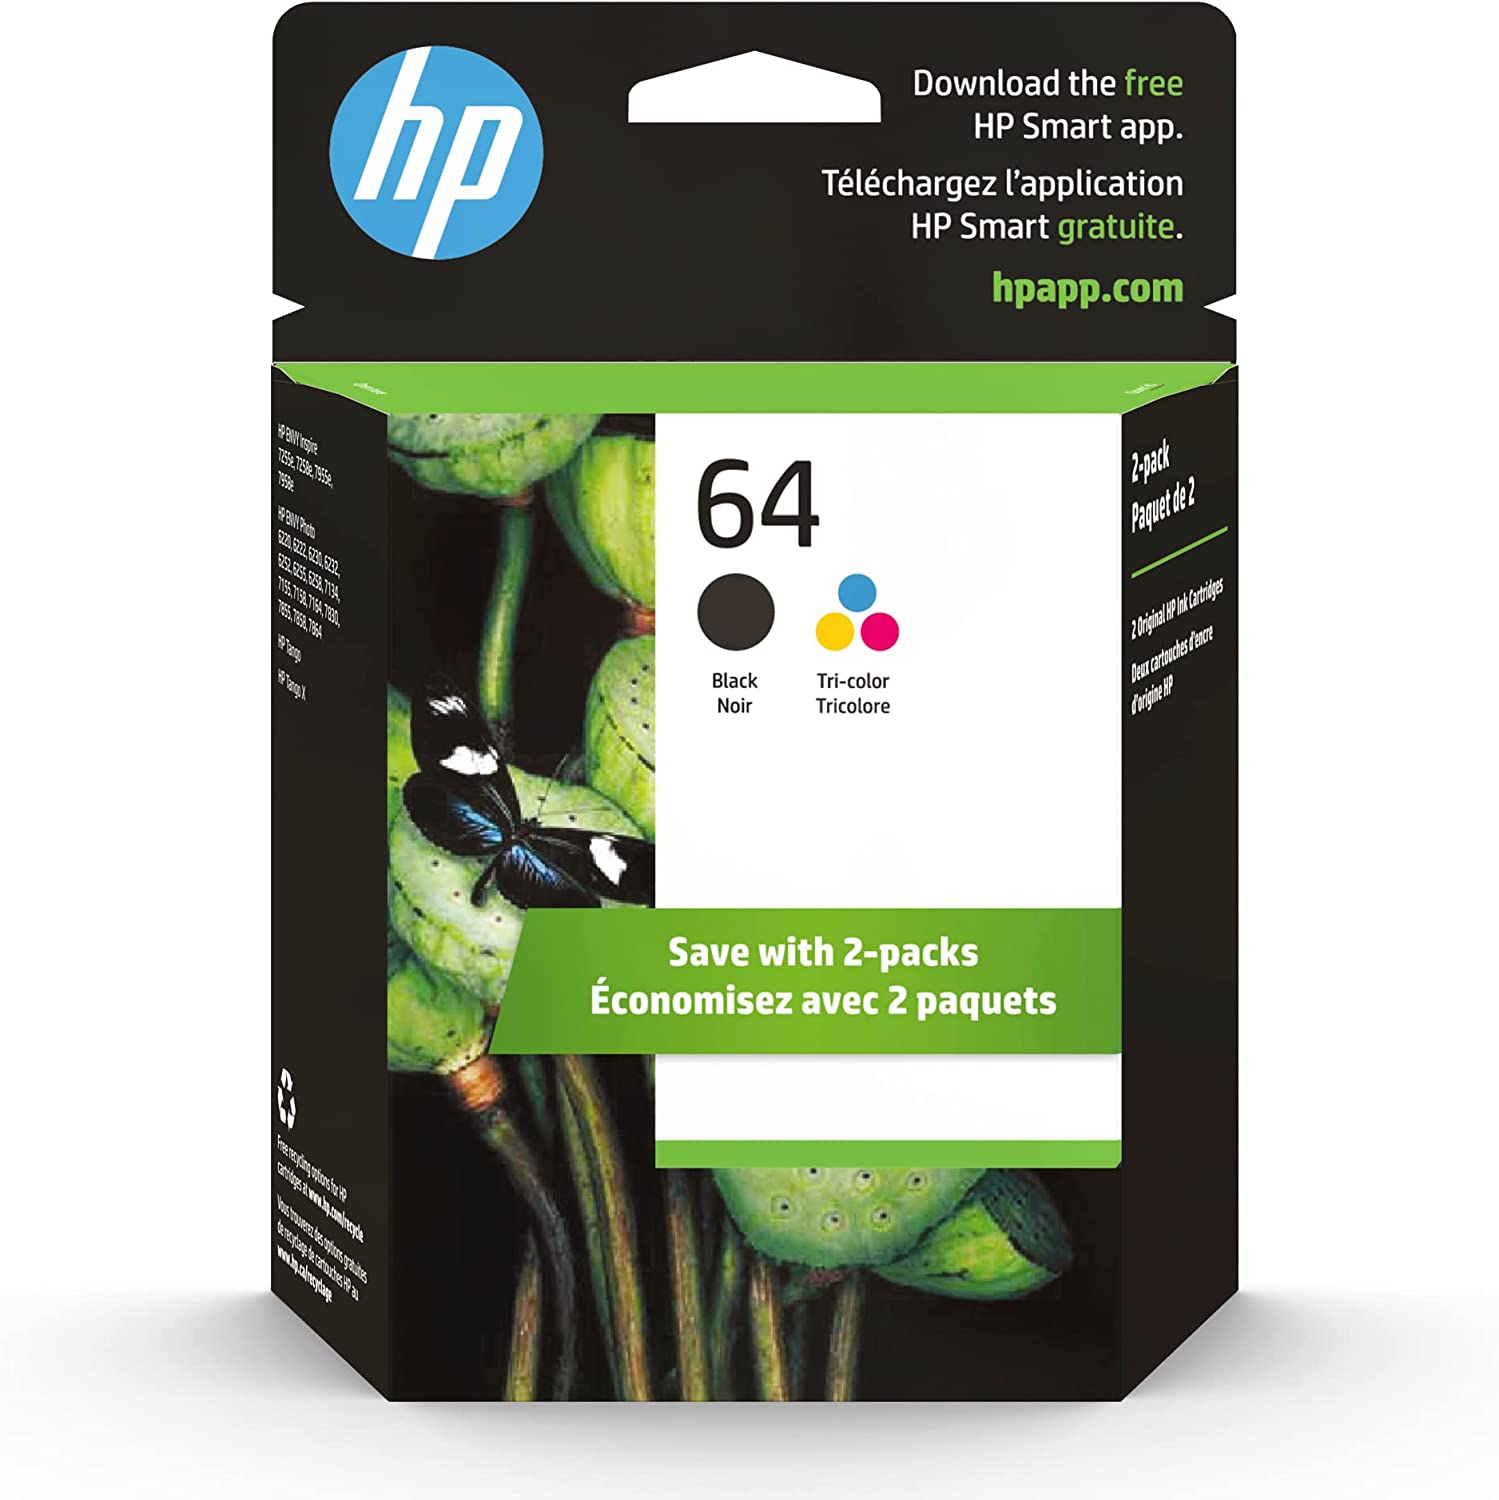 Phone Village Original HP 64 Black/Tri-color Ink Cartridges (2-pack) | Works with HP ENVY Photo 6200, 7100, 7800 Series | Eligible for Instant Ink | X4D92AN + Free Headphones